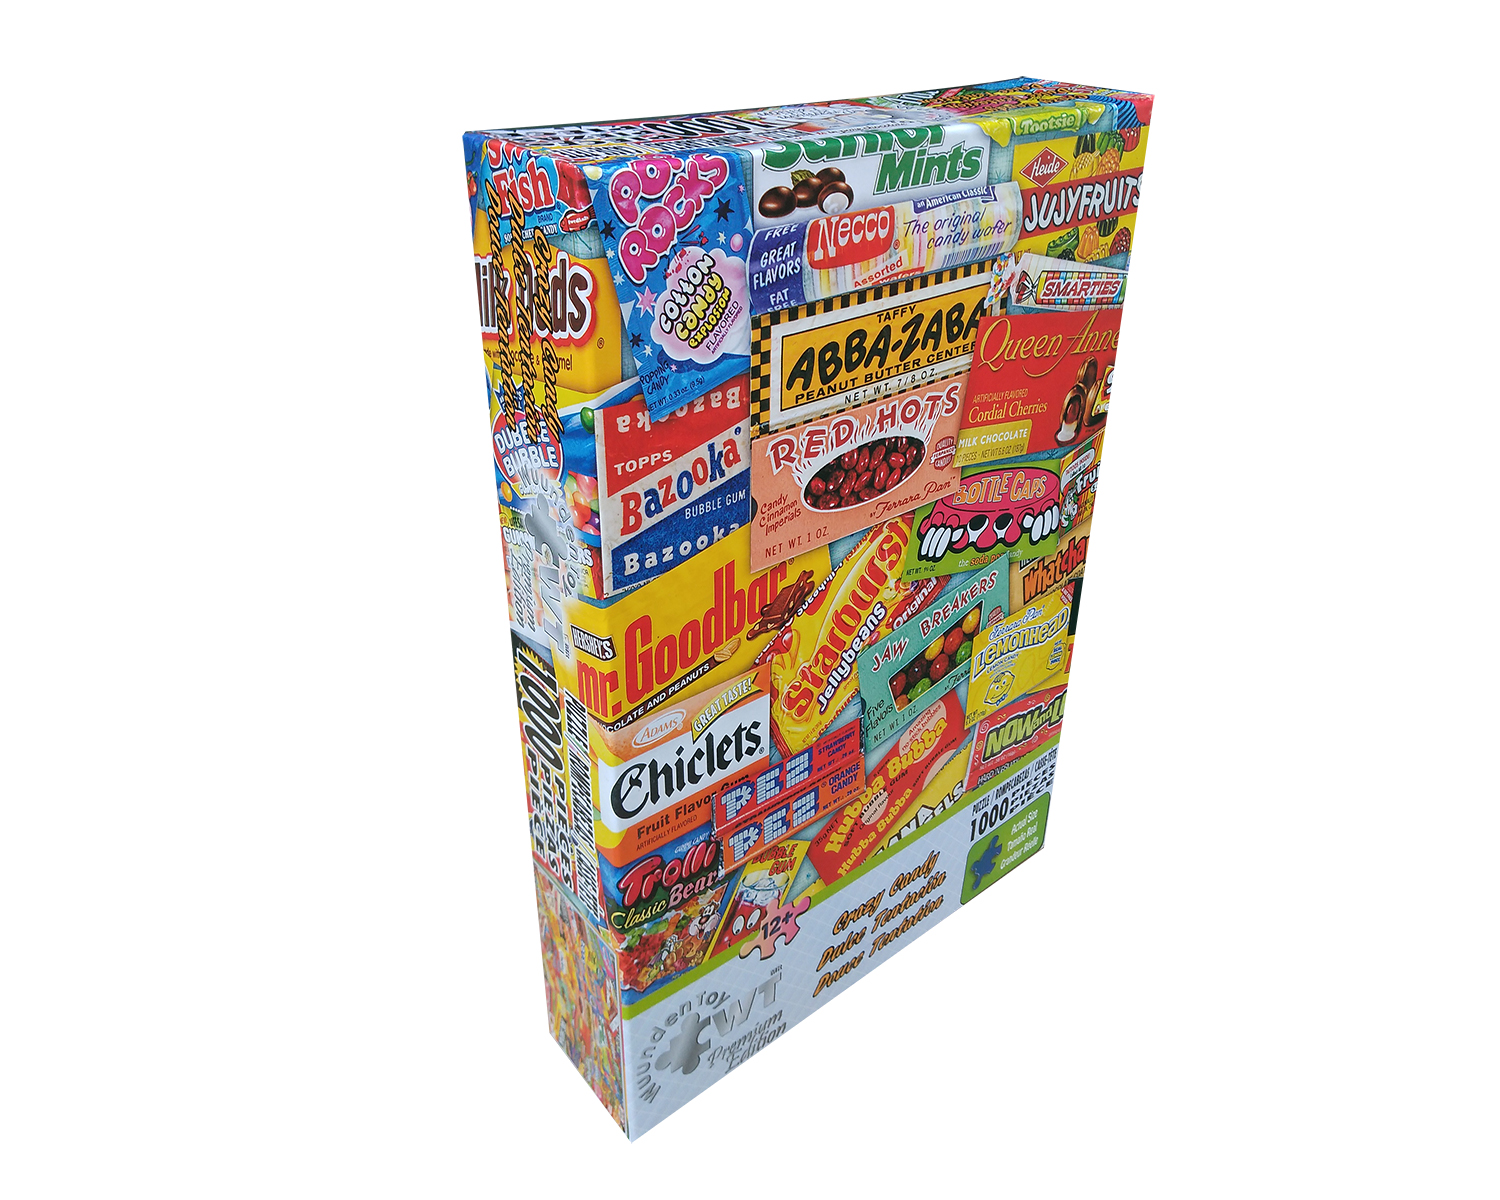 Wuundentoy Premium Edition "Crazy Candy" 1000 Pieces Jigsaw Puzzle - image 2 of 4